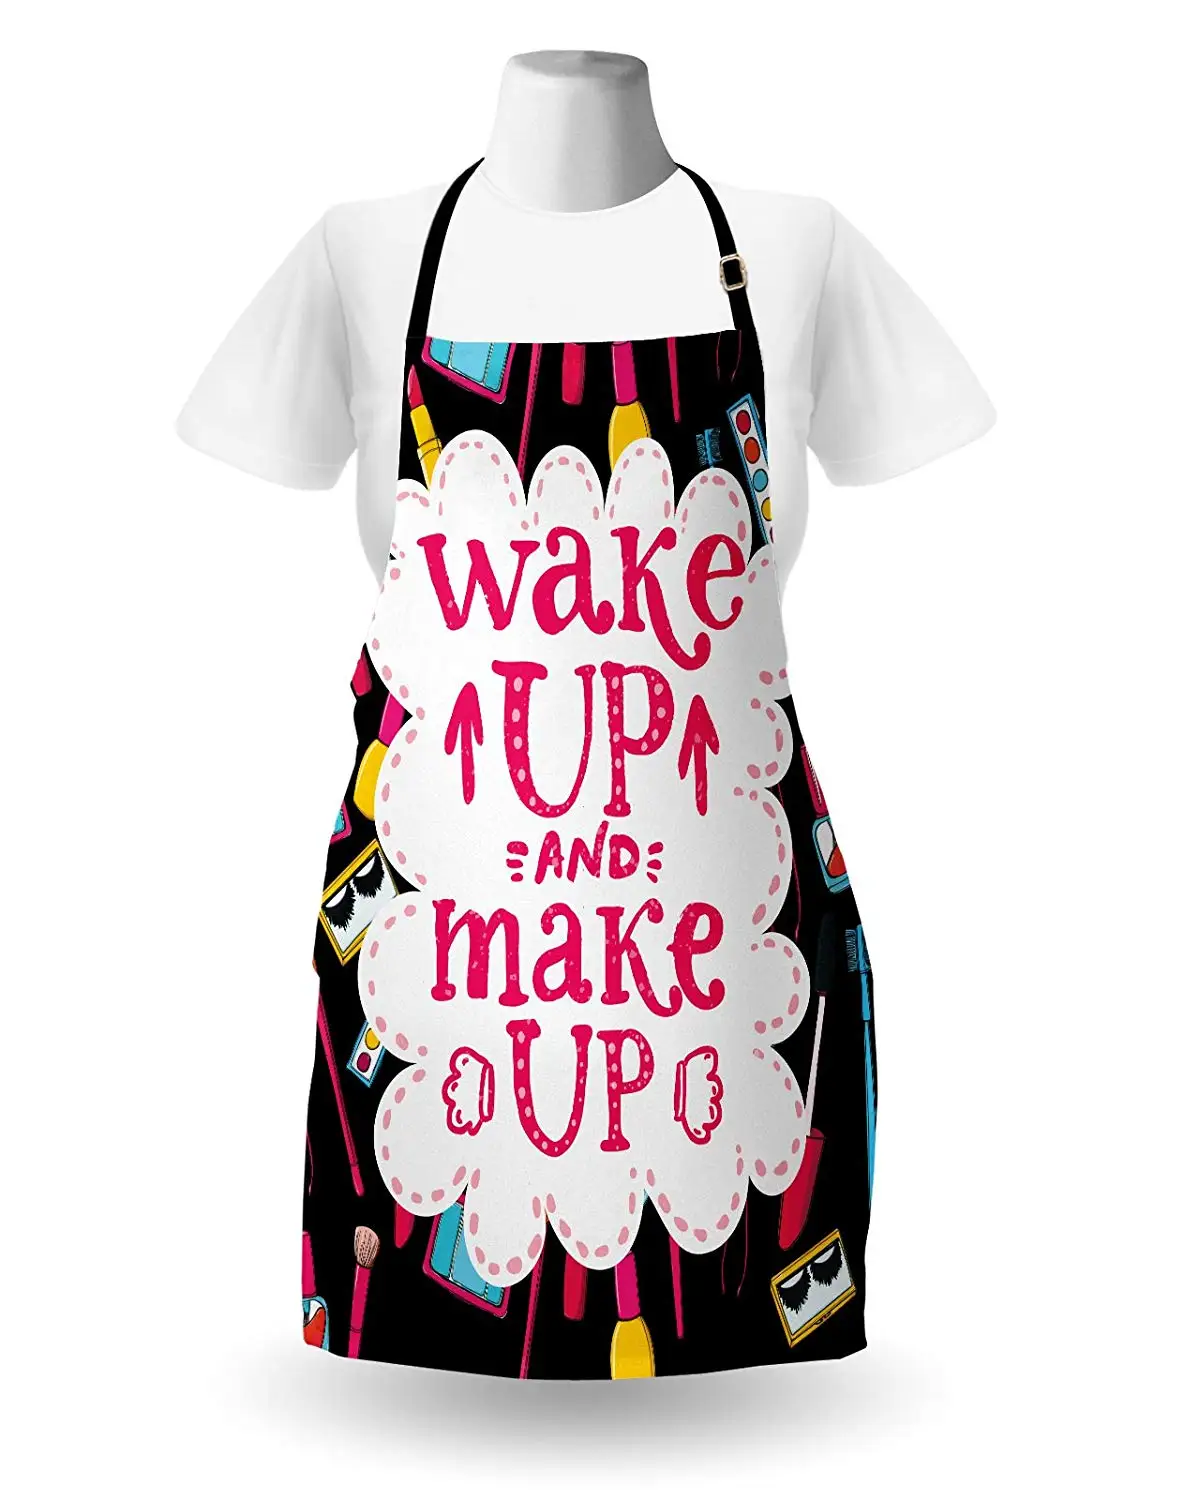 Kitchen Apron Witty Saying Wake Make with Cosmetic Lipstick Mascara and Nail Polish Aprons Men Women Kids Home Cleaning Tools